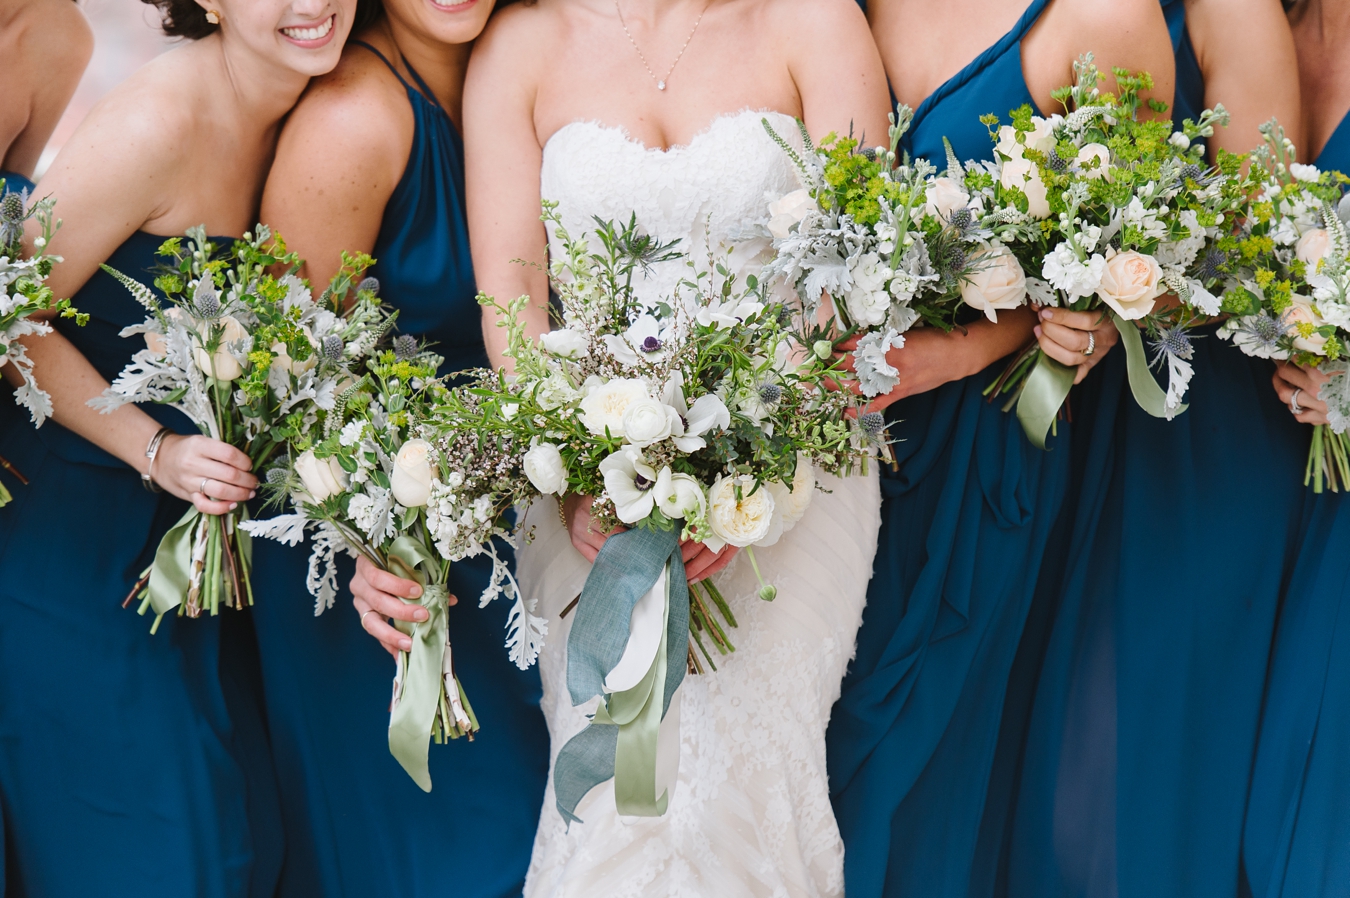 Blue Bridesmaids Dresses and Organic Bouquets by Annapolis Wedding Photographer, Natalie Franke Photography